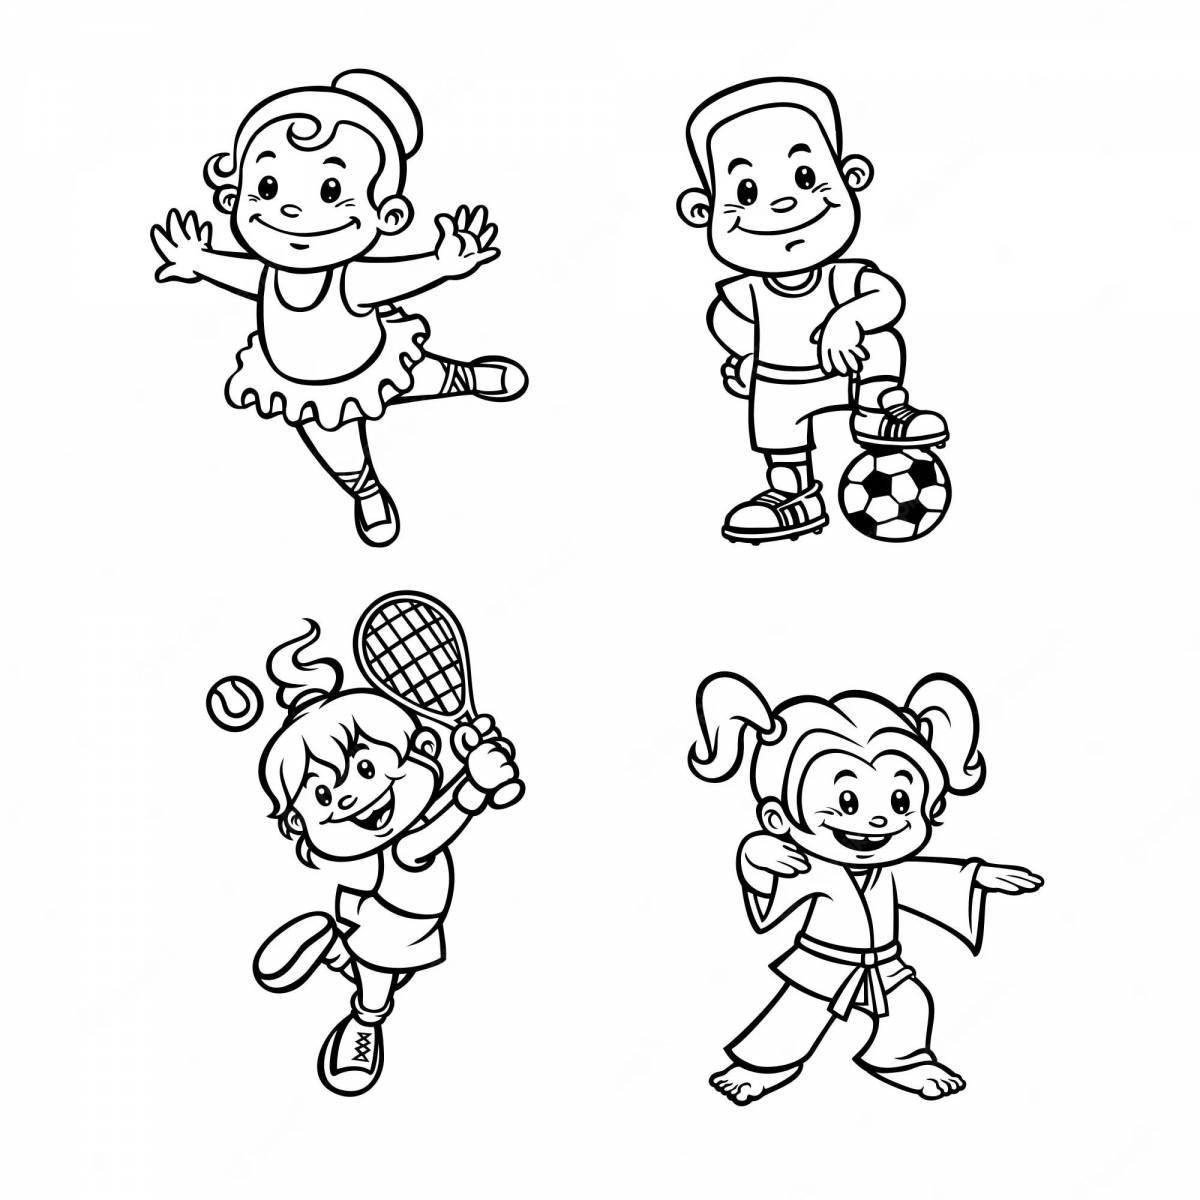 Playful sports coloring book for 5-6 year olds